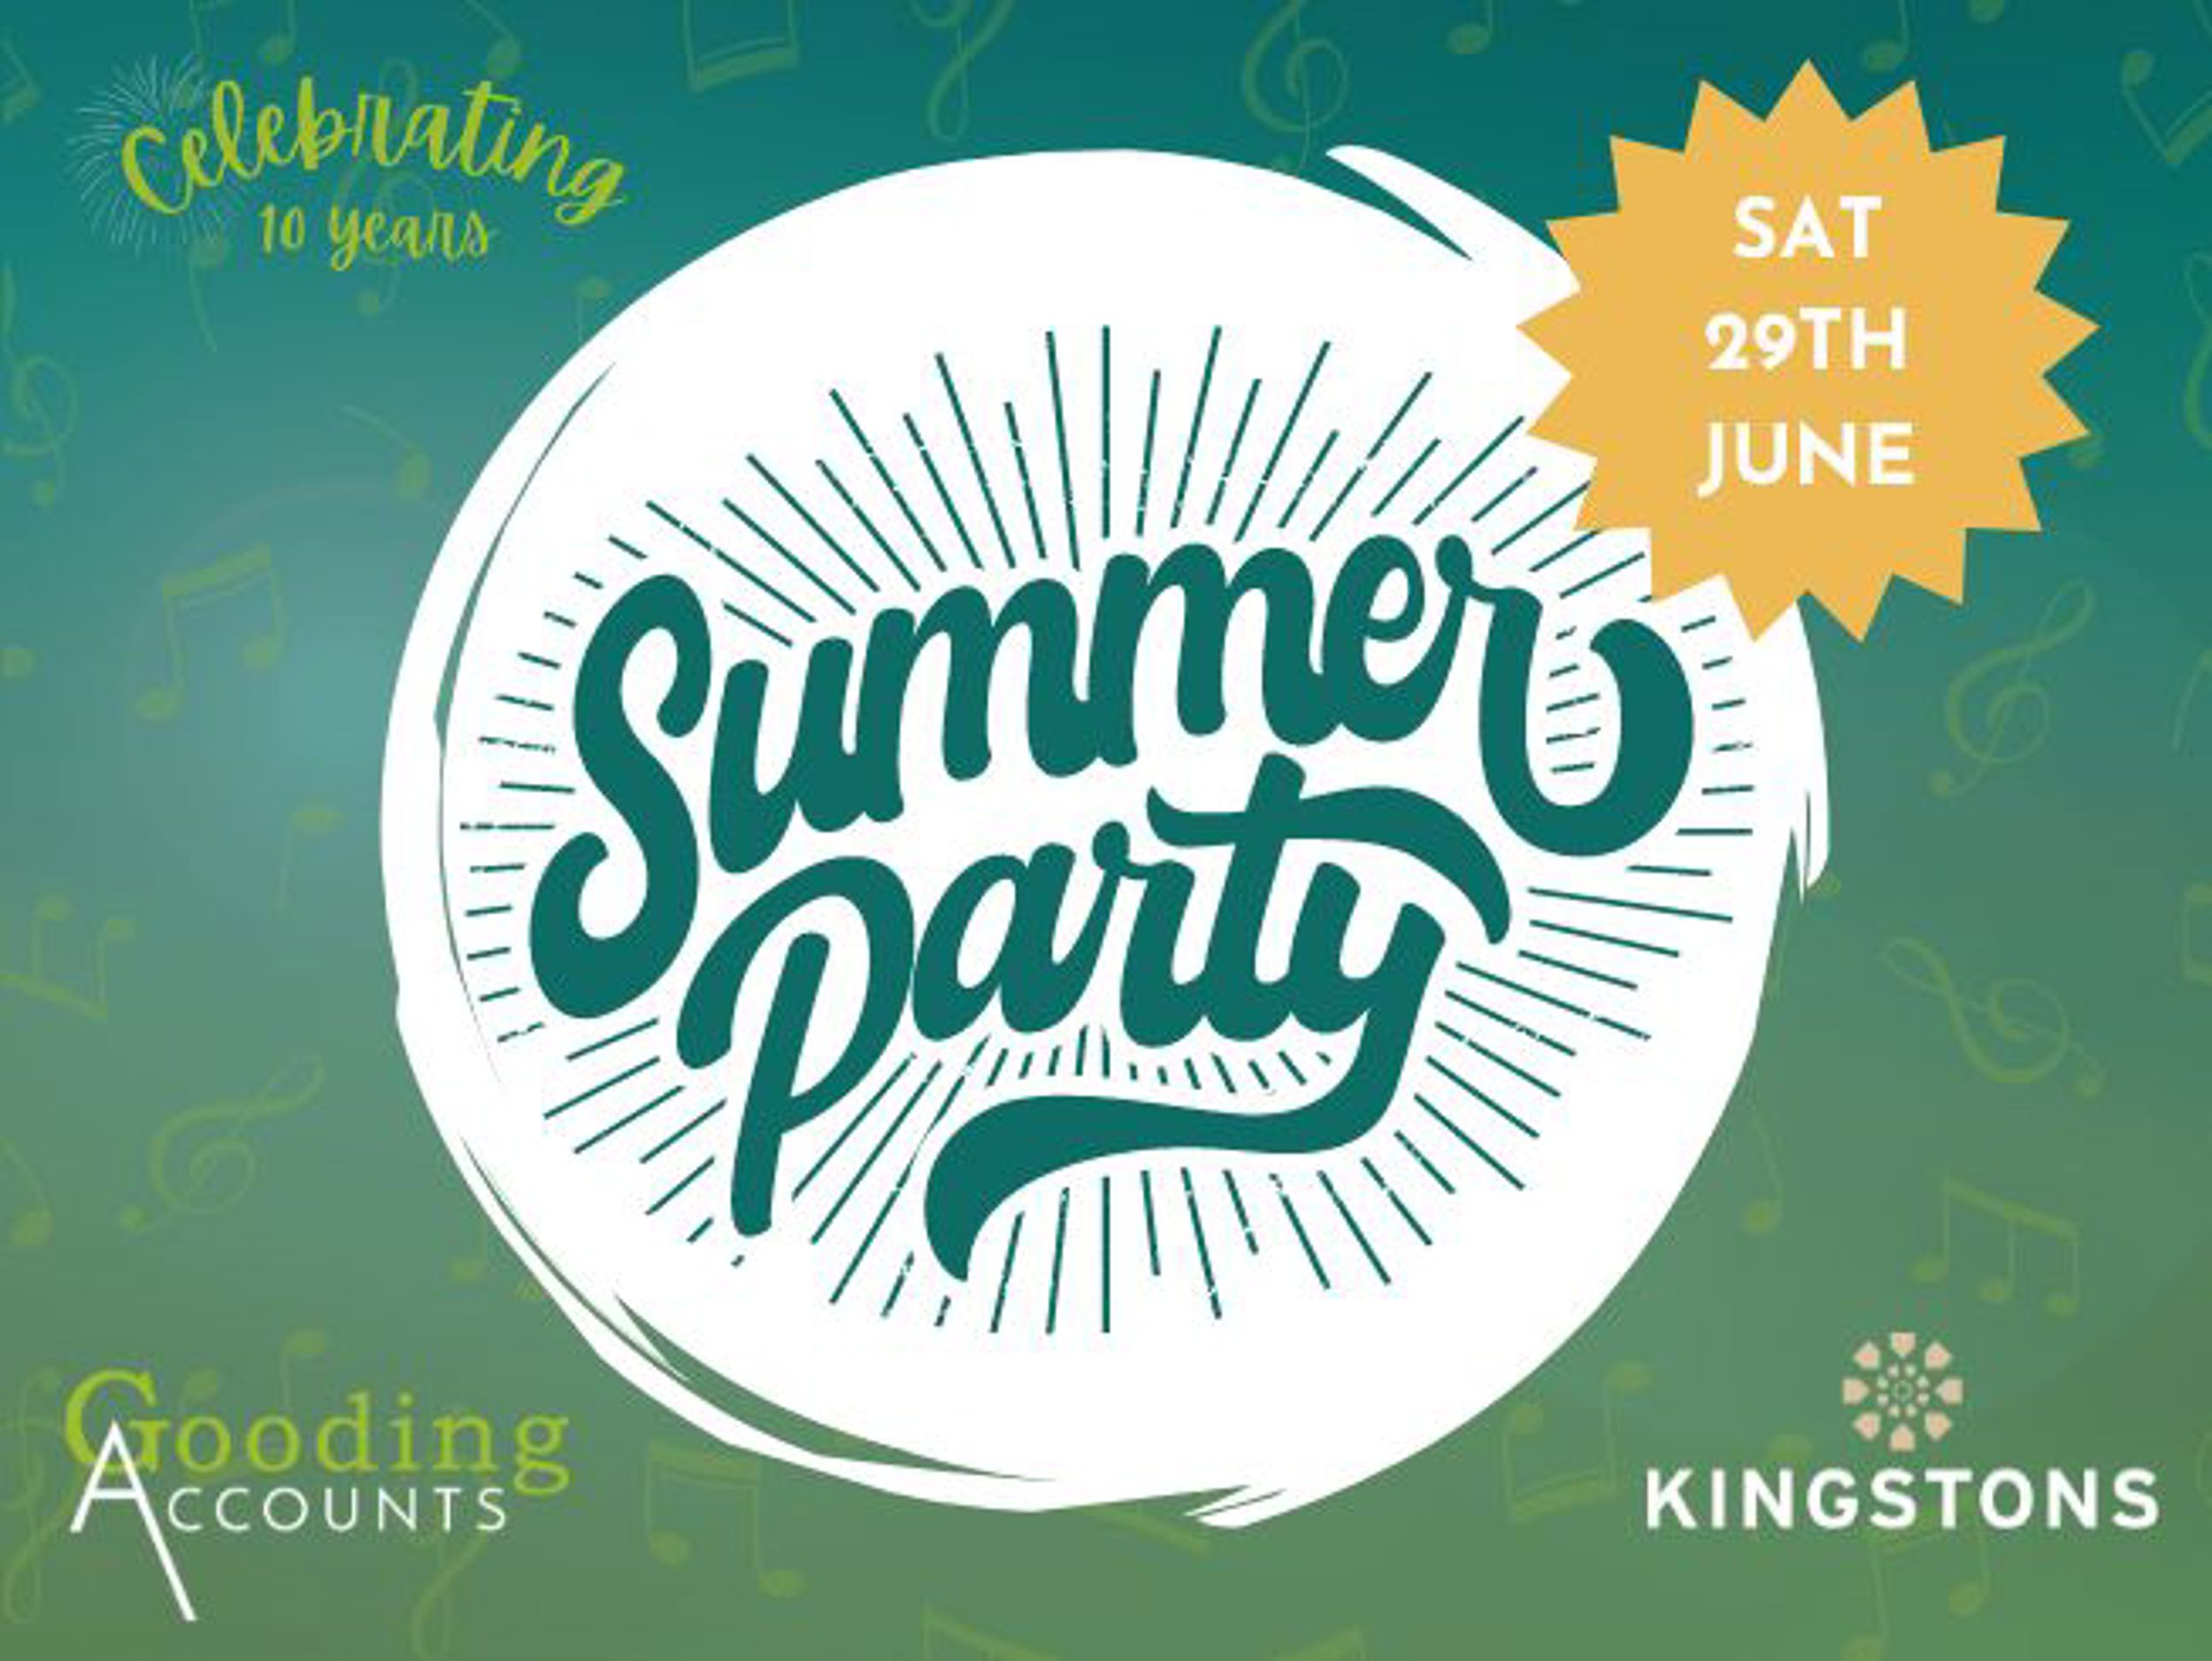 Gooding Accounts Summer Party graphic